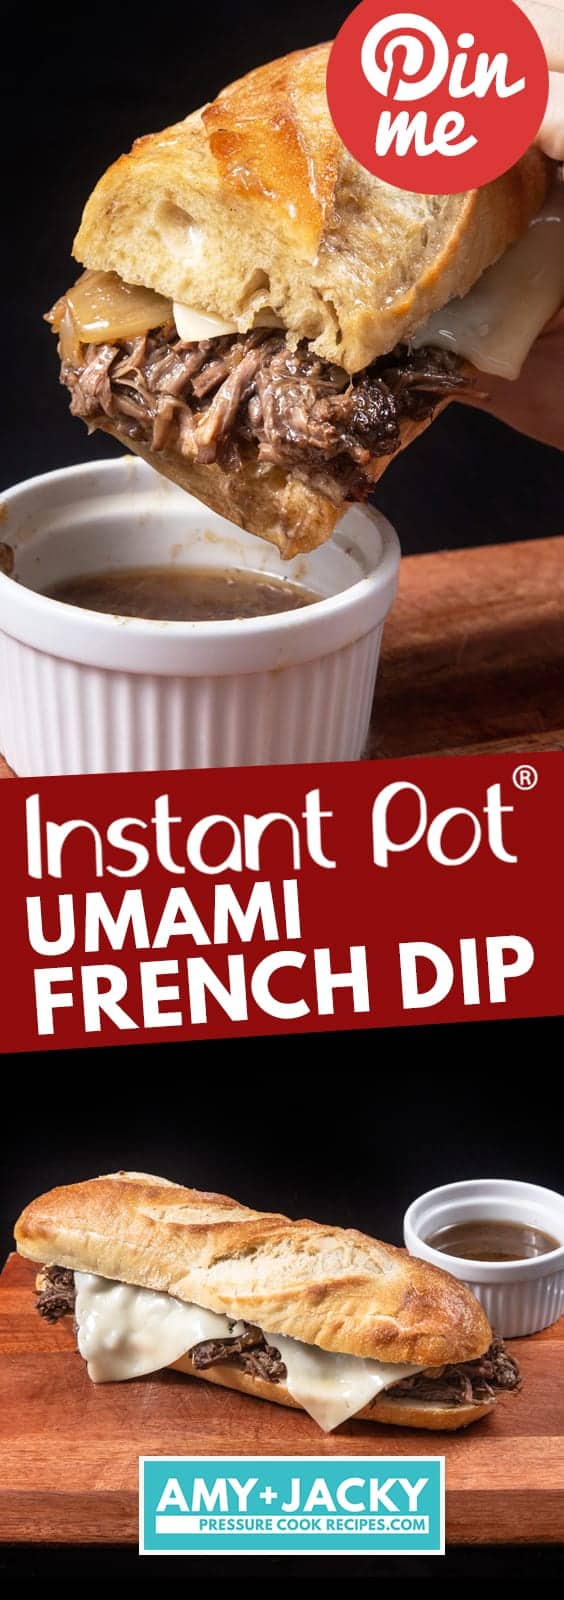 Instant Pot French Dip | Pressure Cook French Dip | Instapot French Dip Sandwiches | Beef Dip | Instant Pot Chuck Roast | Instant Pot Beef Recipes | Healthy Instant Pot Recipes #instantpot #pressurecooker #recipes #easy #beef